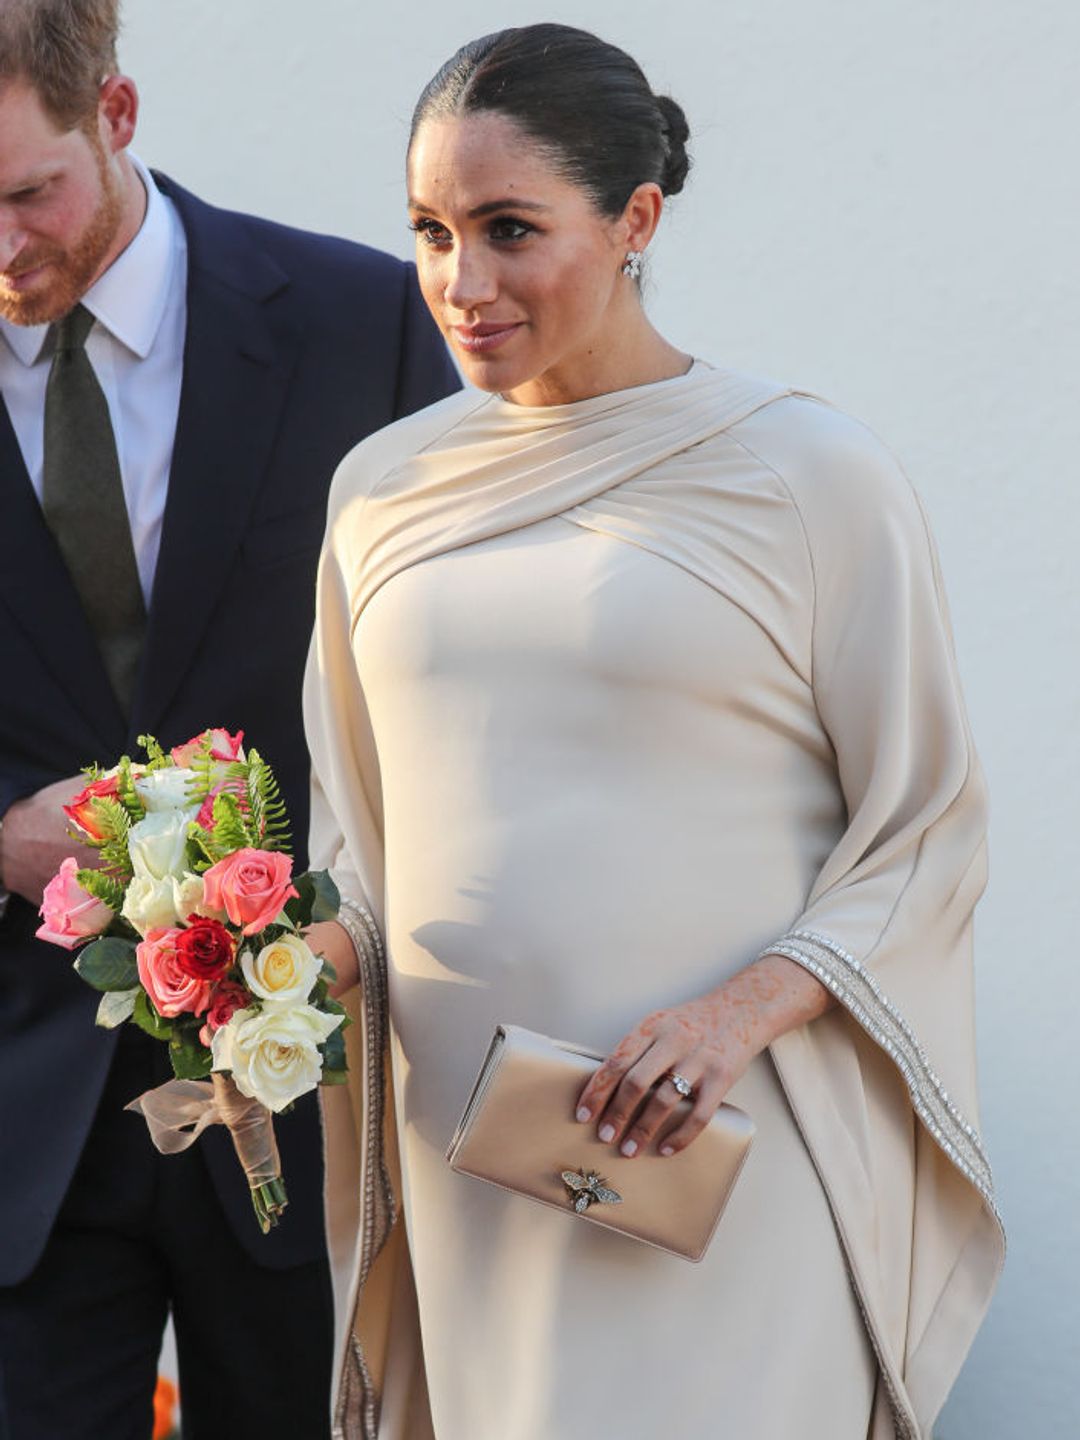 The Duchess of Sussex attends a reception hosted by the British Ambassador to Morocco in 2019